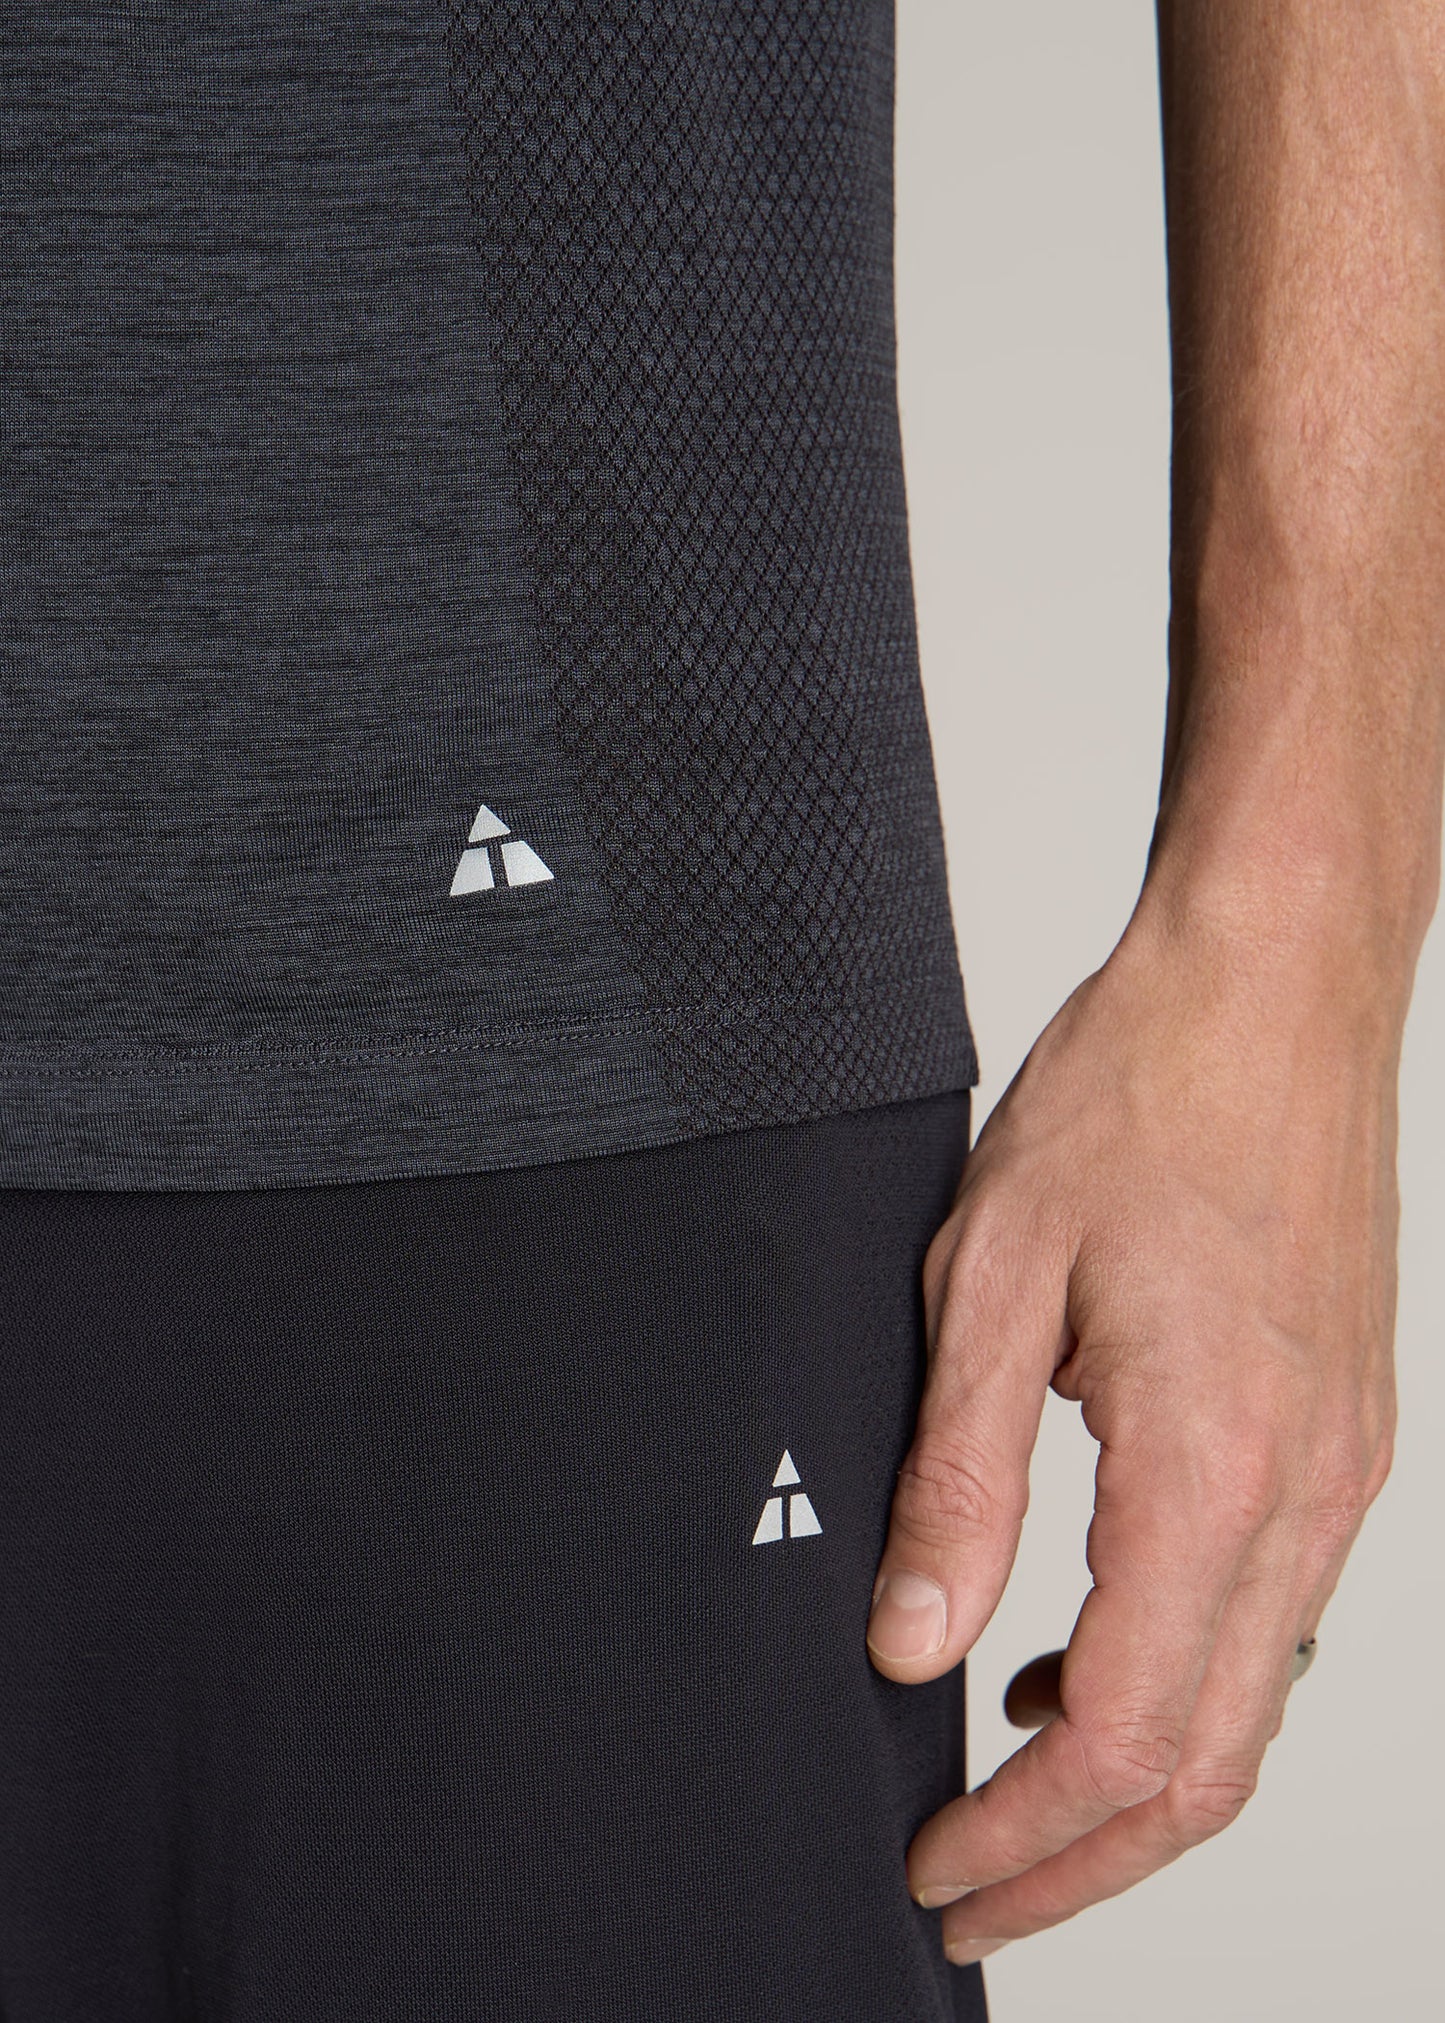 American-Tall-Men-AT-Performance-Engineered-Athletic-Tee-Charcoal-Mix-detail